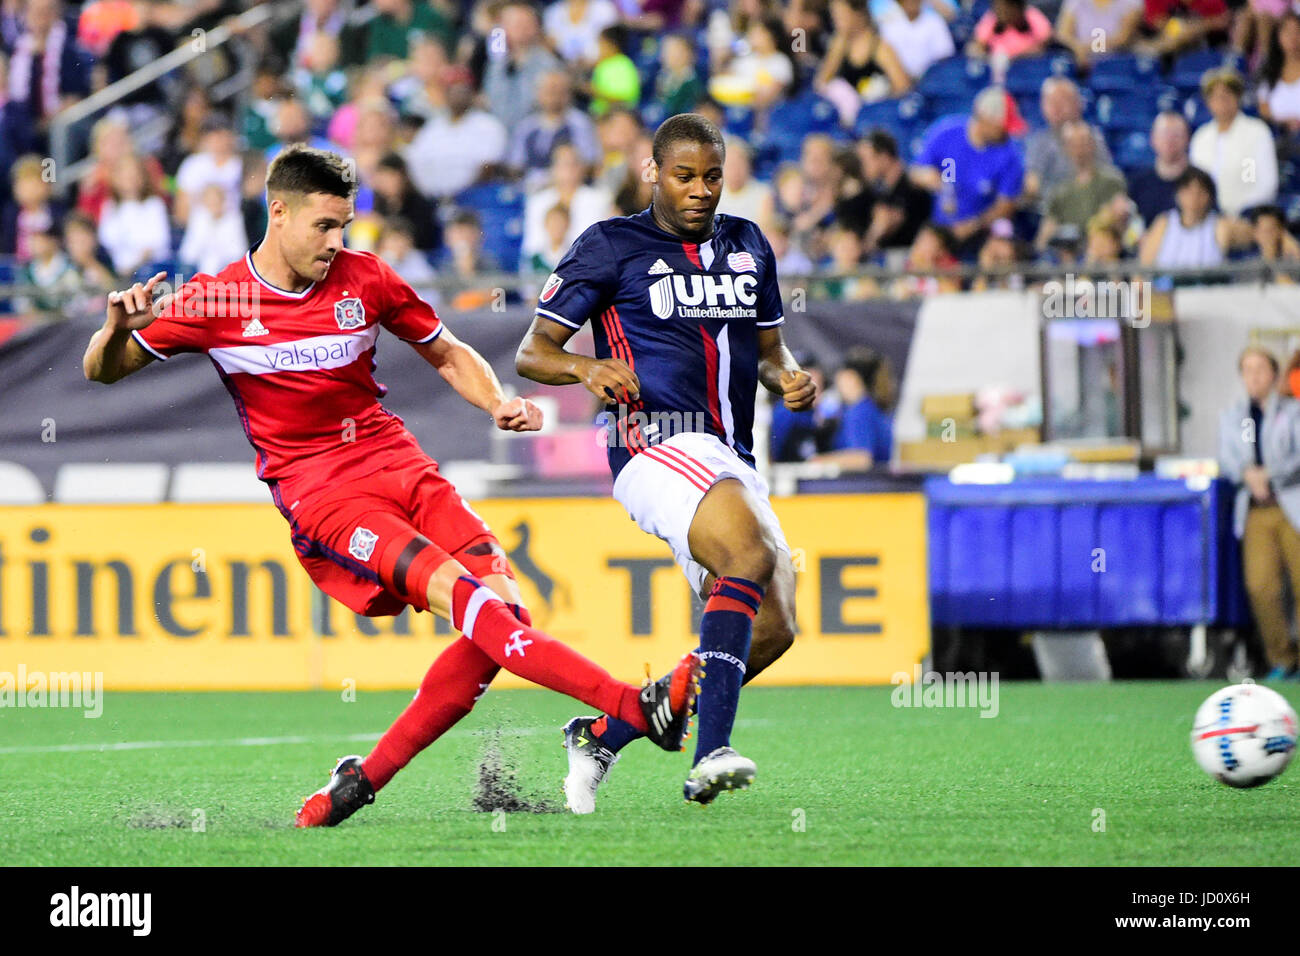 Foxborough Massachusetts, USA. 17th June, 2017. Chicago Fire forward Luis Solignac (9) gets his shot by New England Revolution defender Andrew Farrell (2) during the MLS game between Chicago Fire and the New England Revolution held at Gillette Stadium in Foxborough Massachusetts. Chicago defeats New England 2-1. Eric Canha/CSM/Alamy Live News Stock Photo